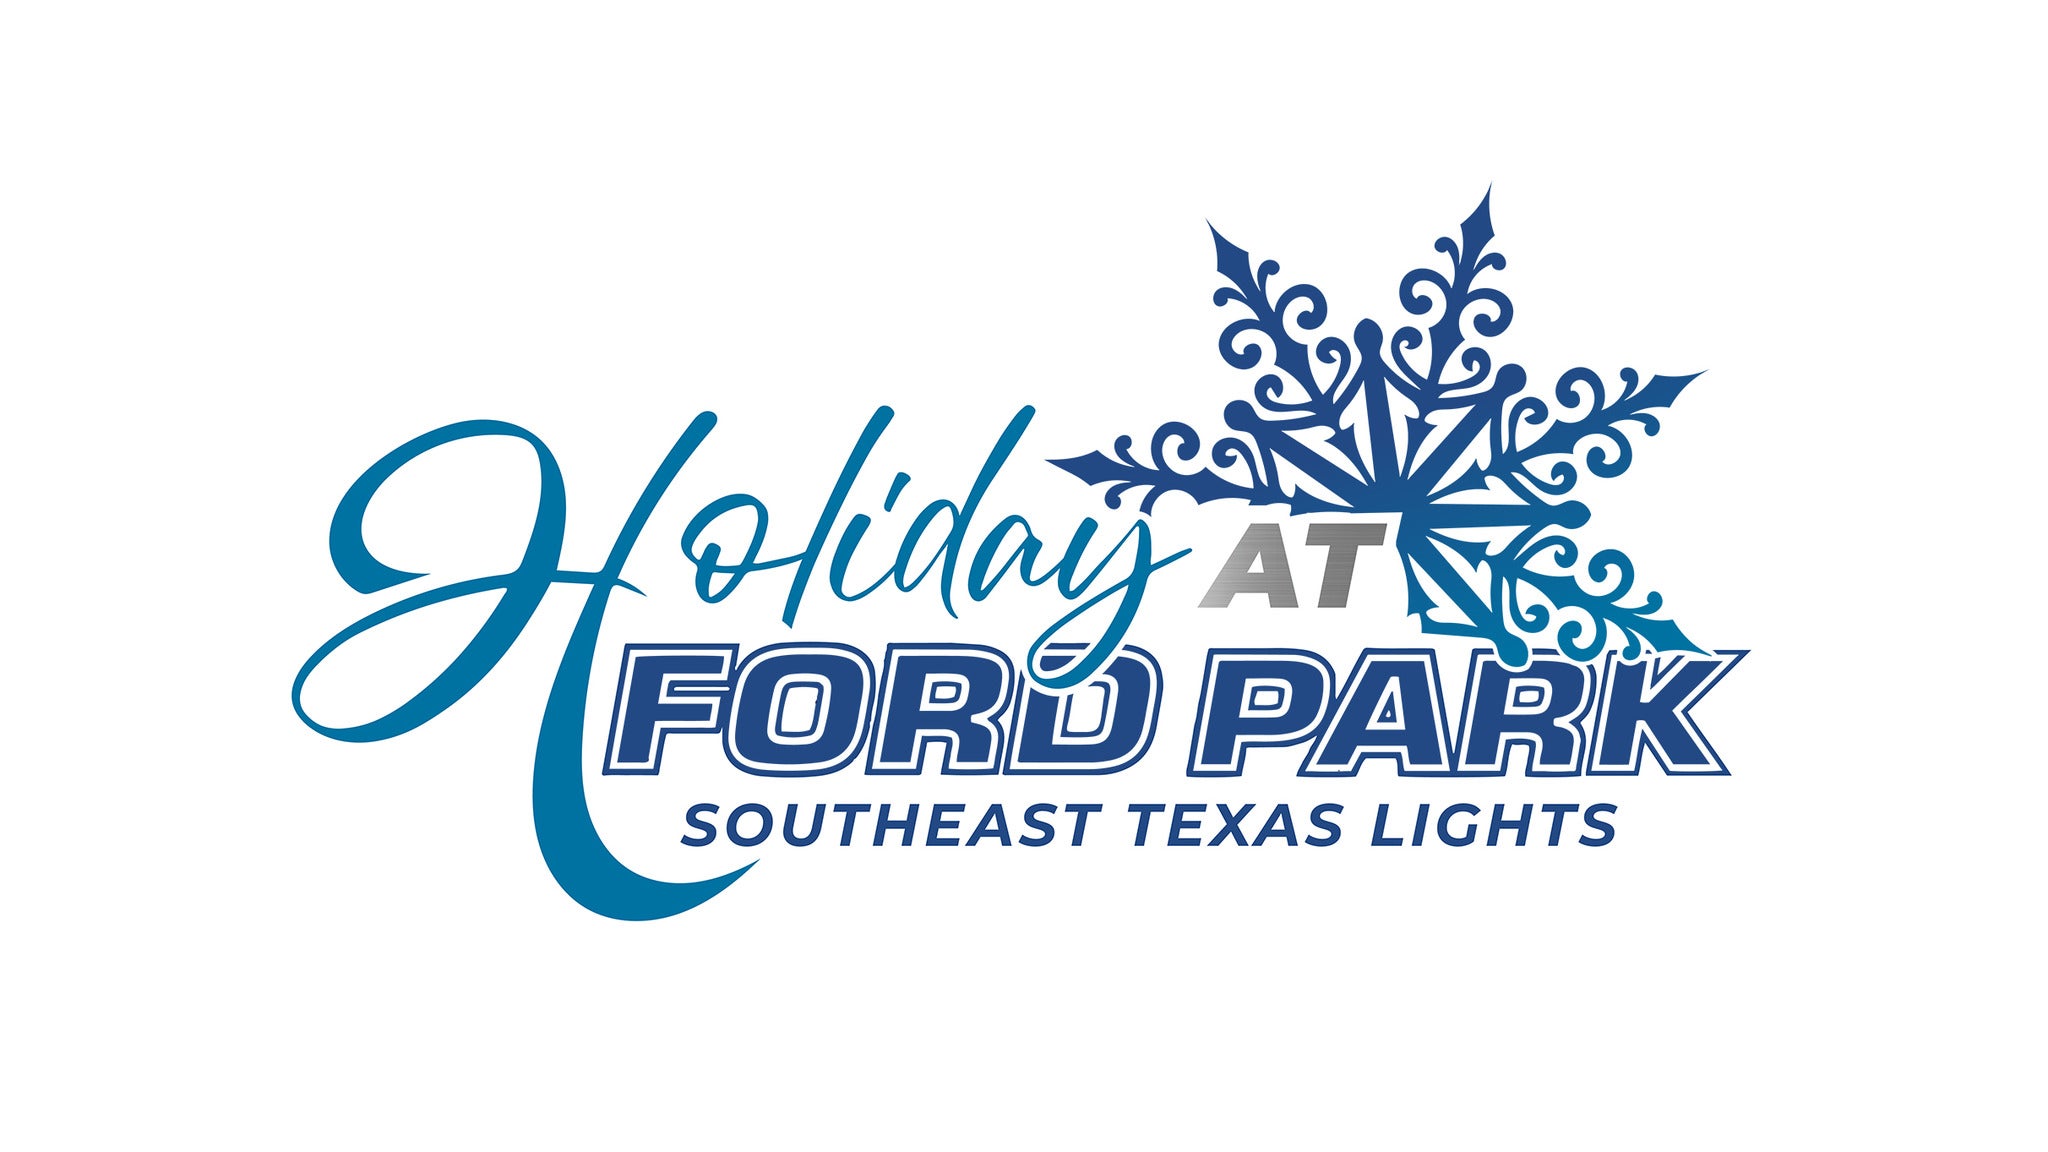 Holiday at Ford Park - Southeast Texas Lights in Beaumont promo photo for Exclusive presale offer code